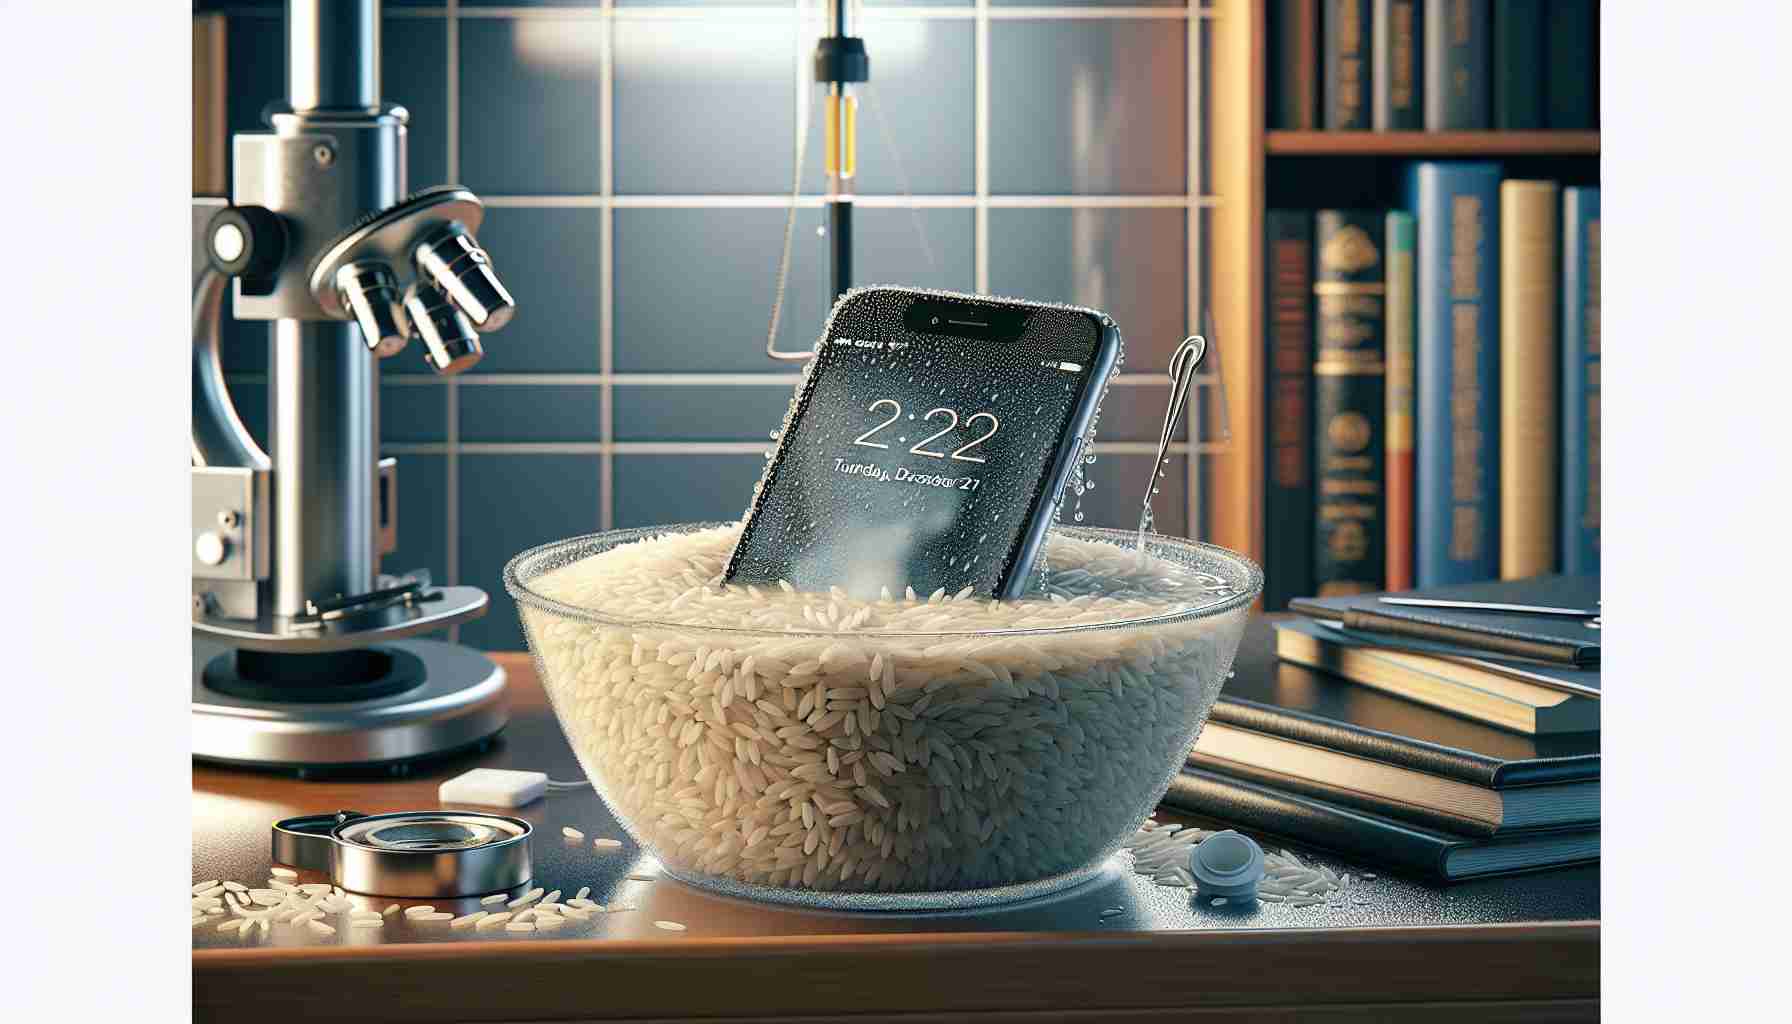 Debunking the Myth: Rice Won’t Save Your Wet Smartphone